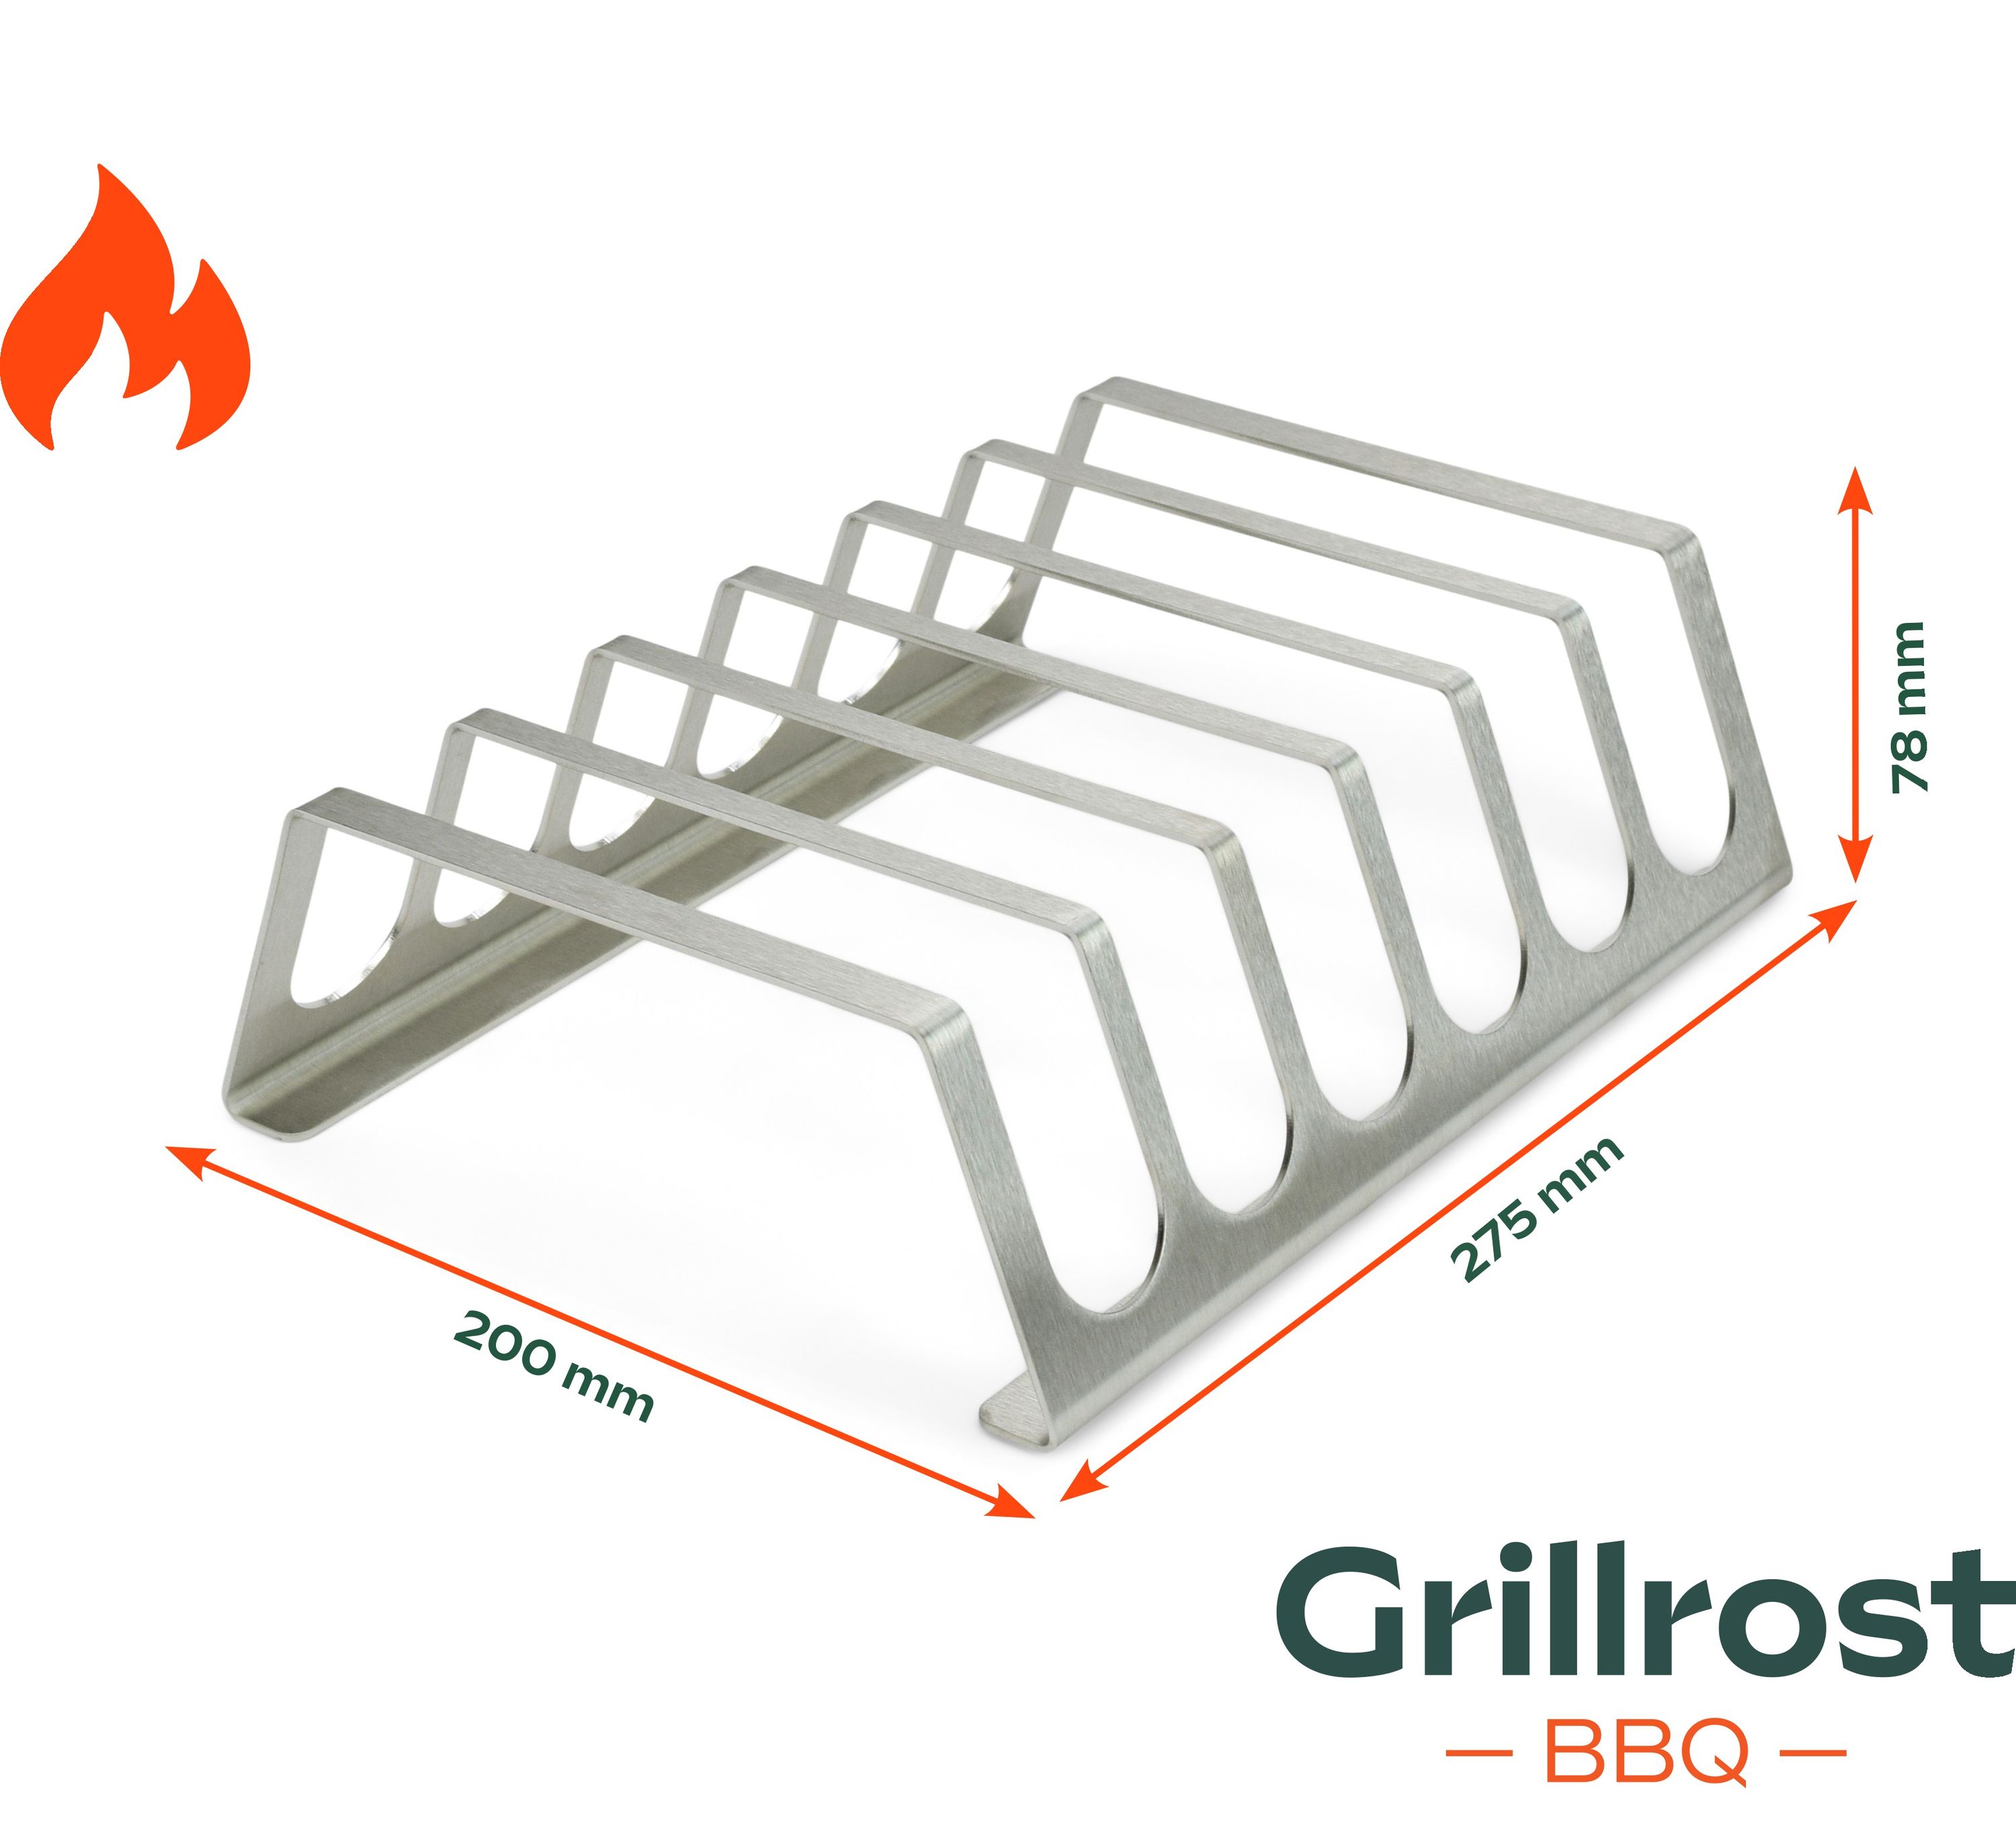 Stainless steel spare rib holder 6 ribrack for grill and oven